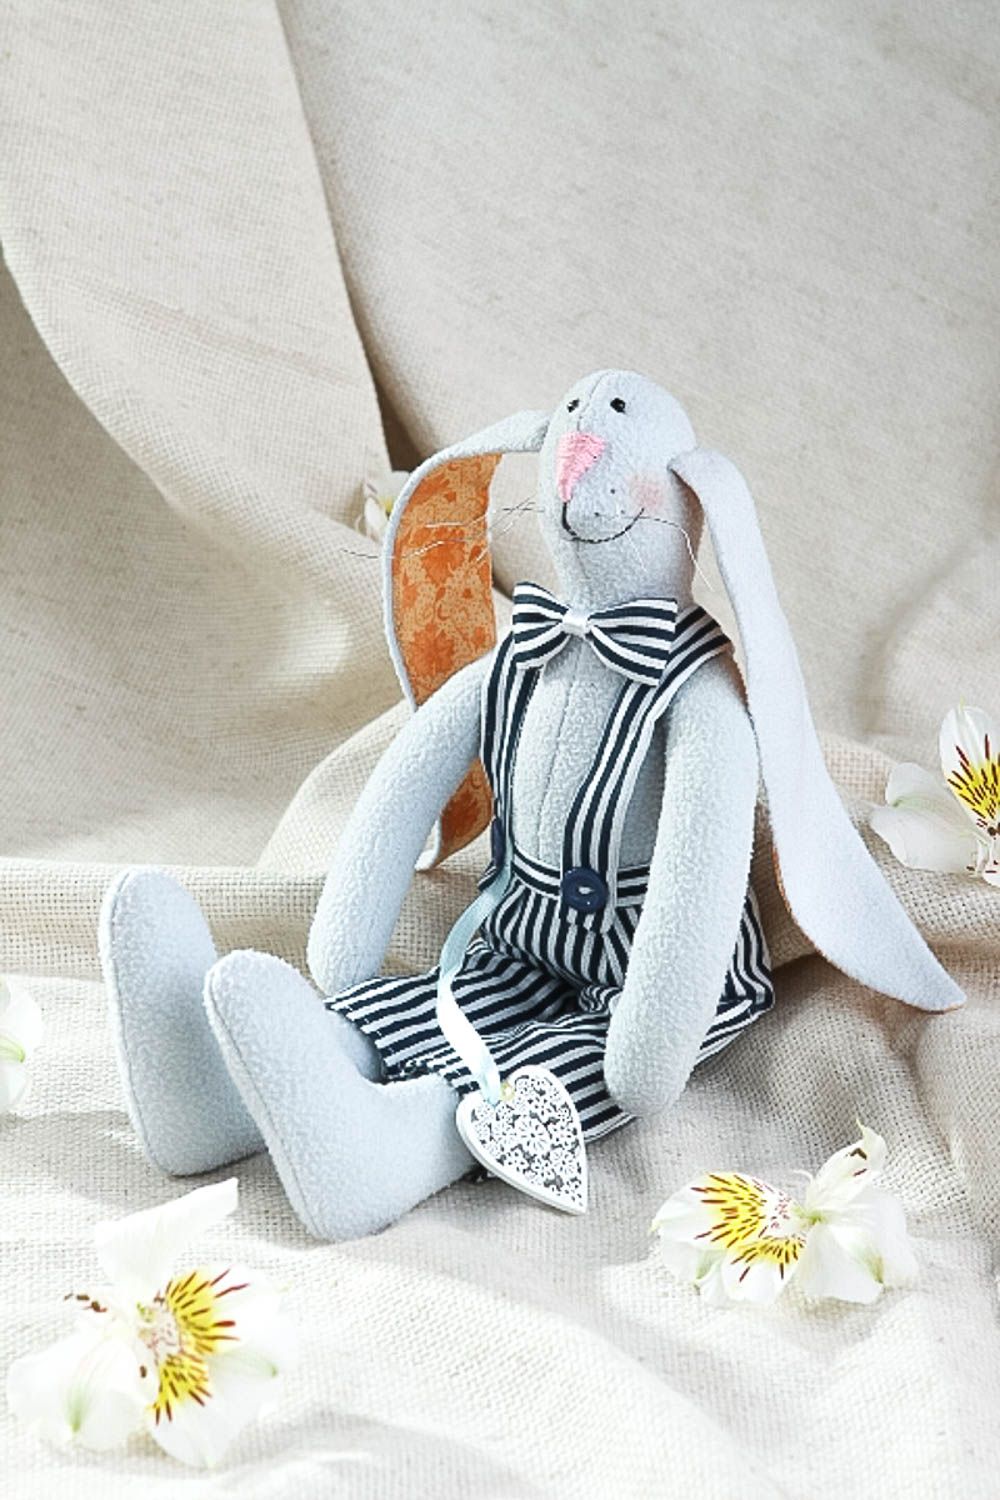 Beautiful handmade soft toy home decoration small gifts decorative use only photo 1